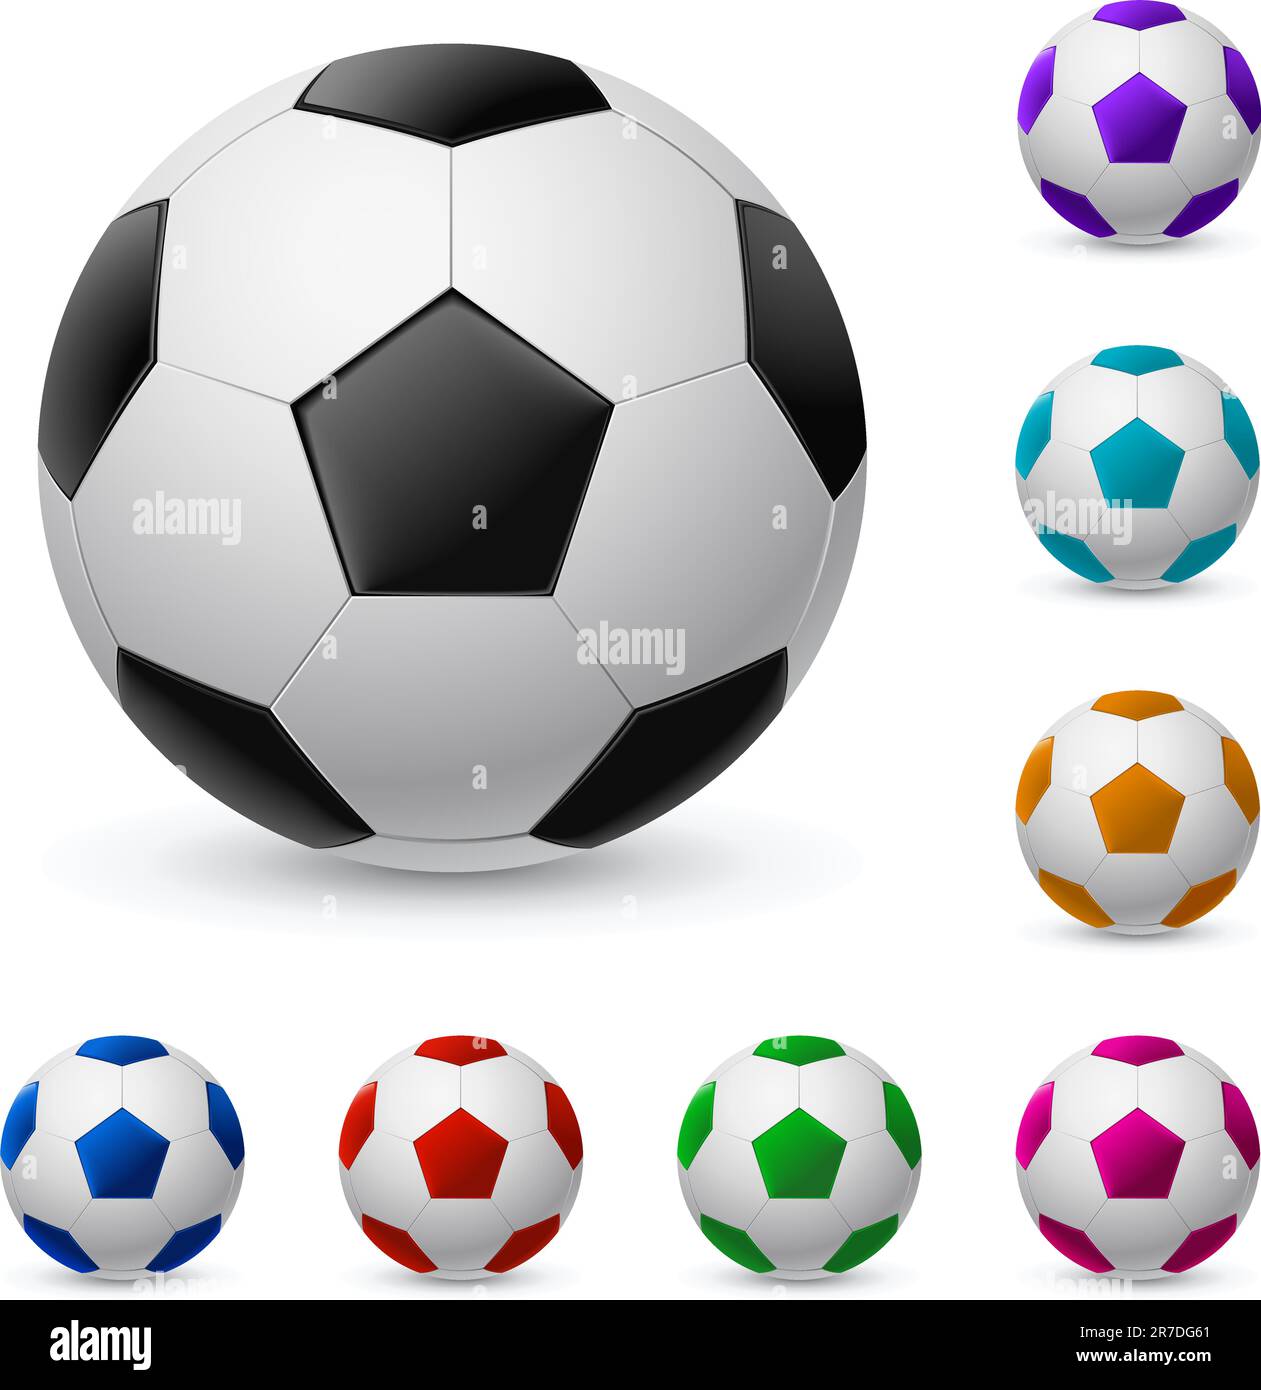 Realistic soccer ball in different colors. Illustration on white background Stock Vector